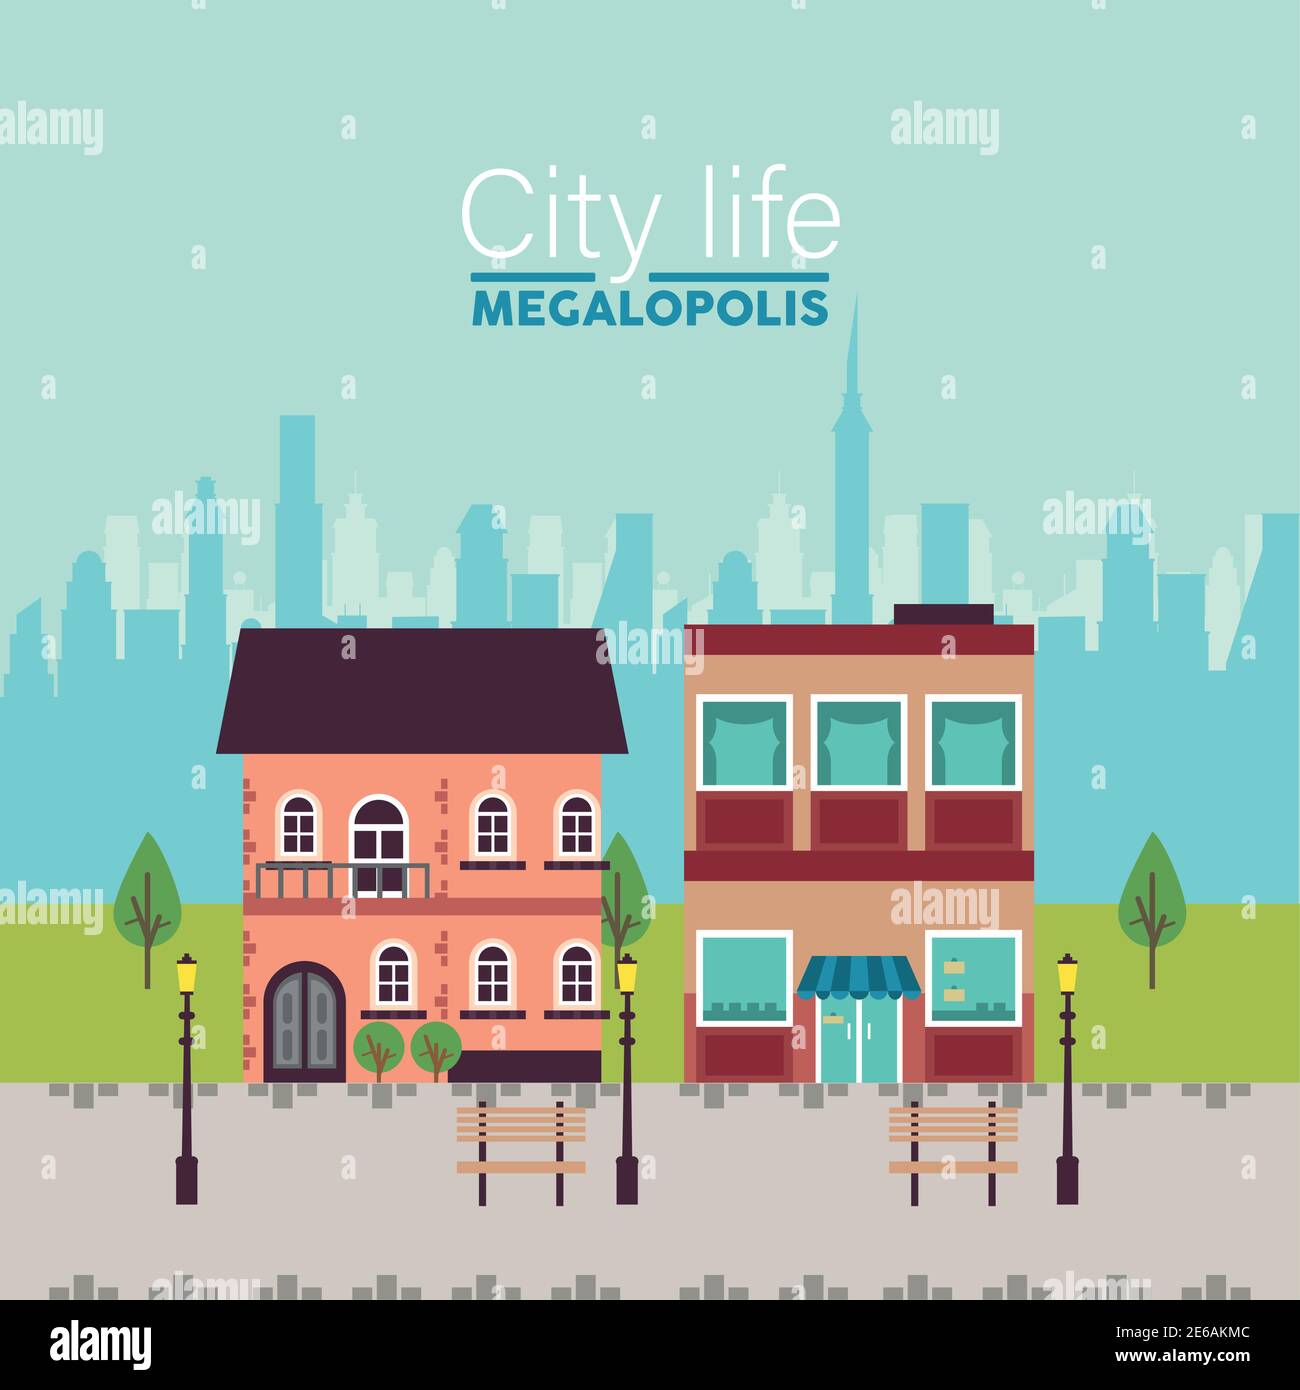 city life megalopolis lettering in cityscape scene with benches and lamps vector illustration design Stock Vector